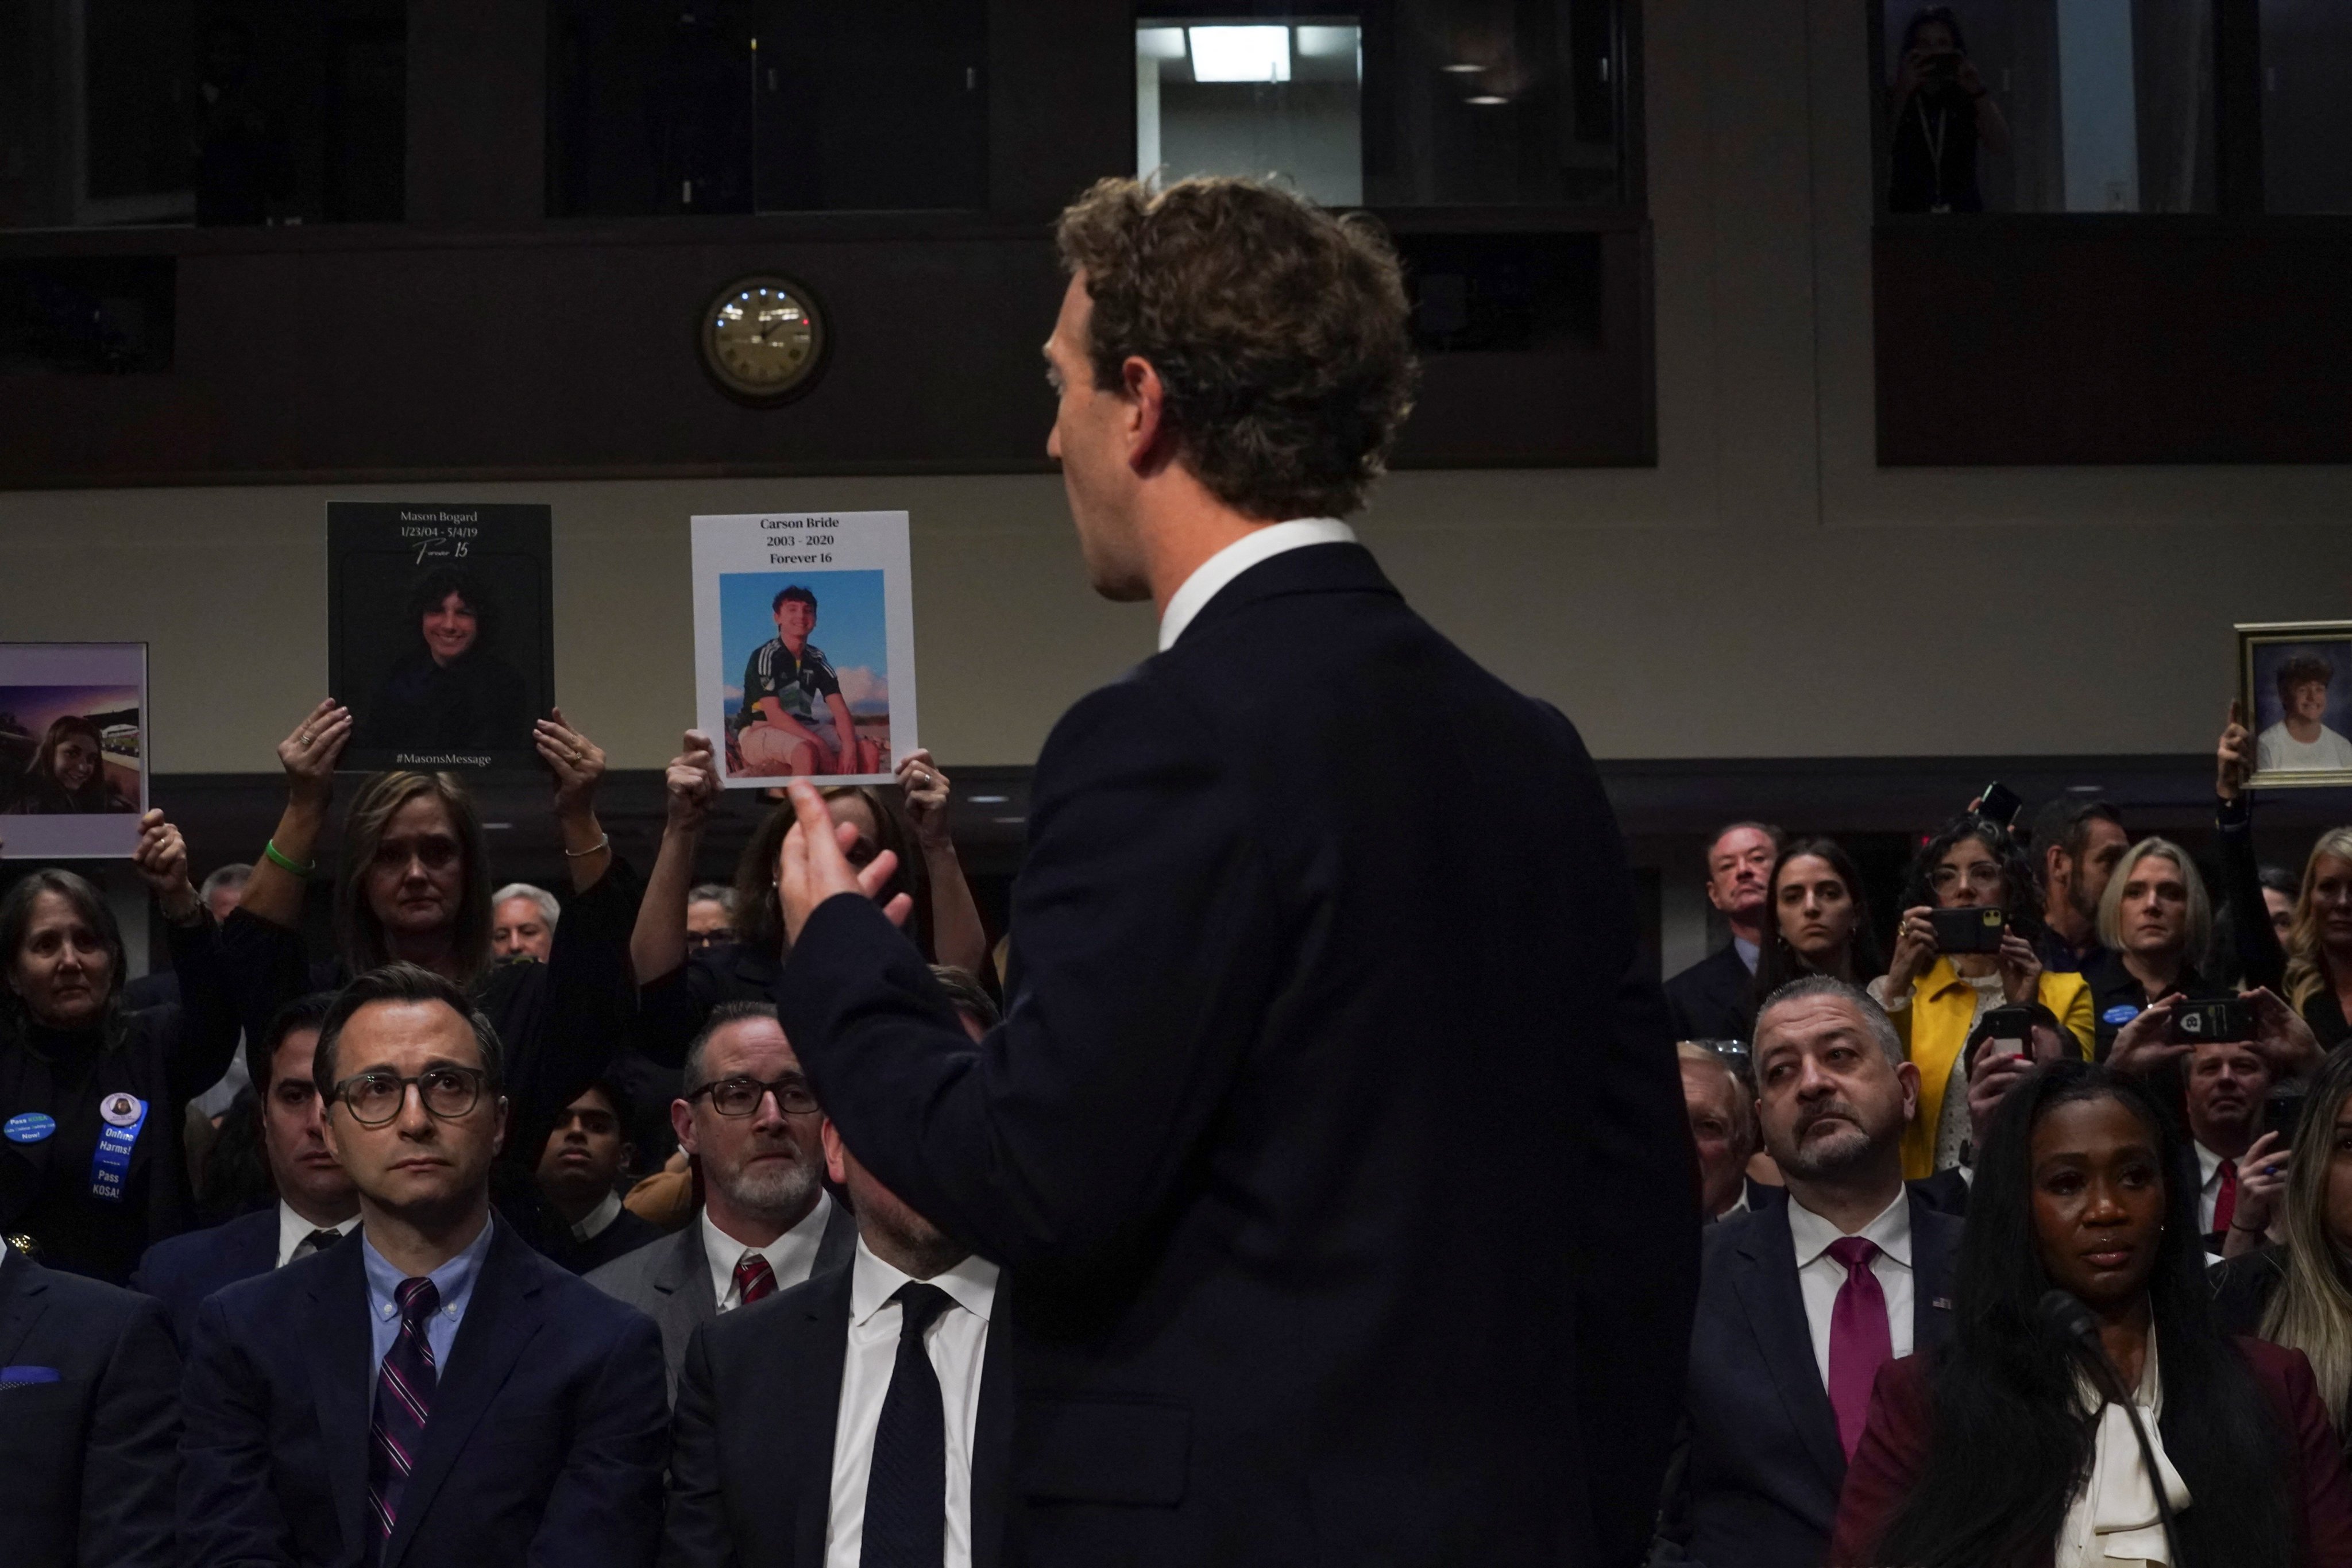 Meta’s CEO Mark Zuckerberg offers an apology to family members in the audience during the Senate Judiciary Committee hearing on online child sexual exploitation, at the US Capitol, in Washington, on January 31. Photo: Reuters